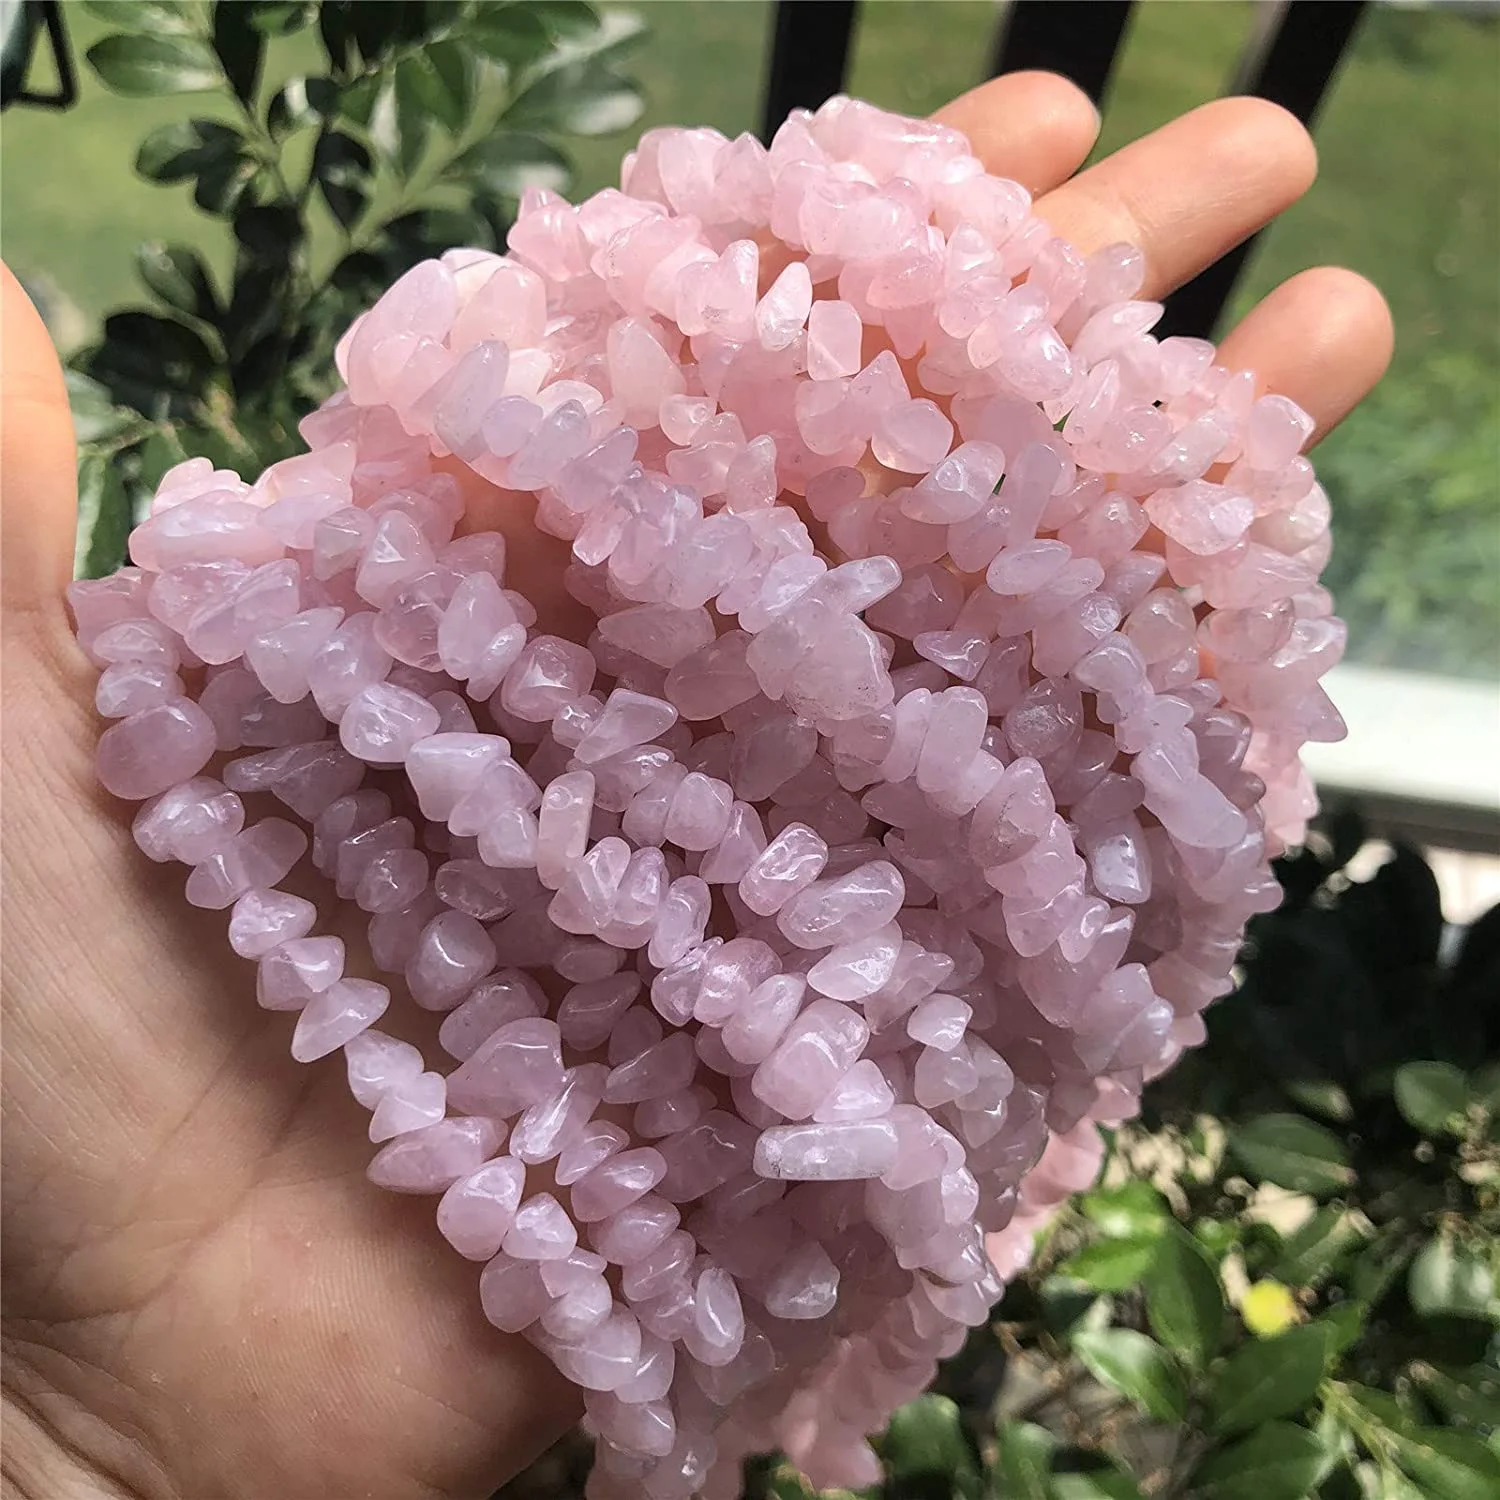 

5-8mm Rose Quartz & Amethyst Tumbled Stone Chips Beads for Jewelry Making Irregular Shaped Healing Crystal Loose Beads Strand